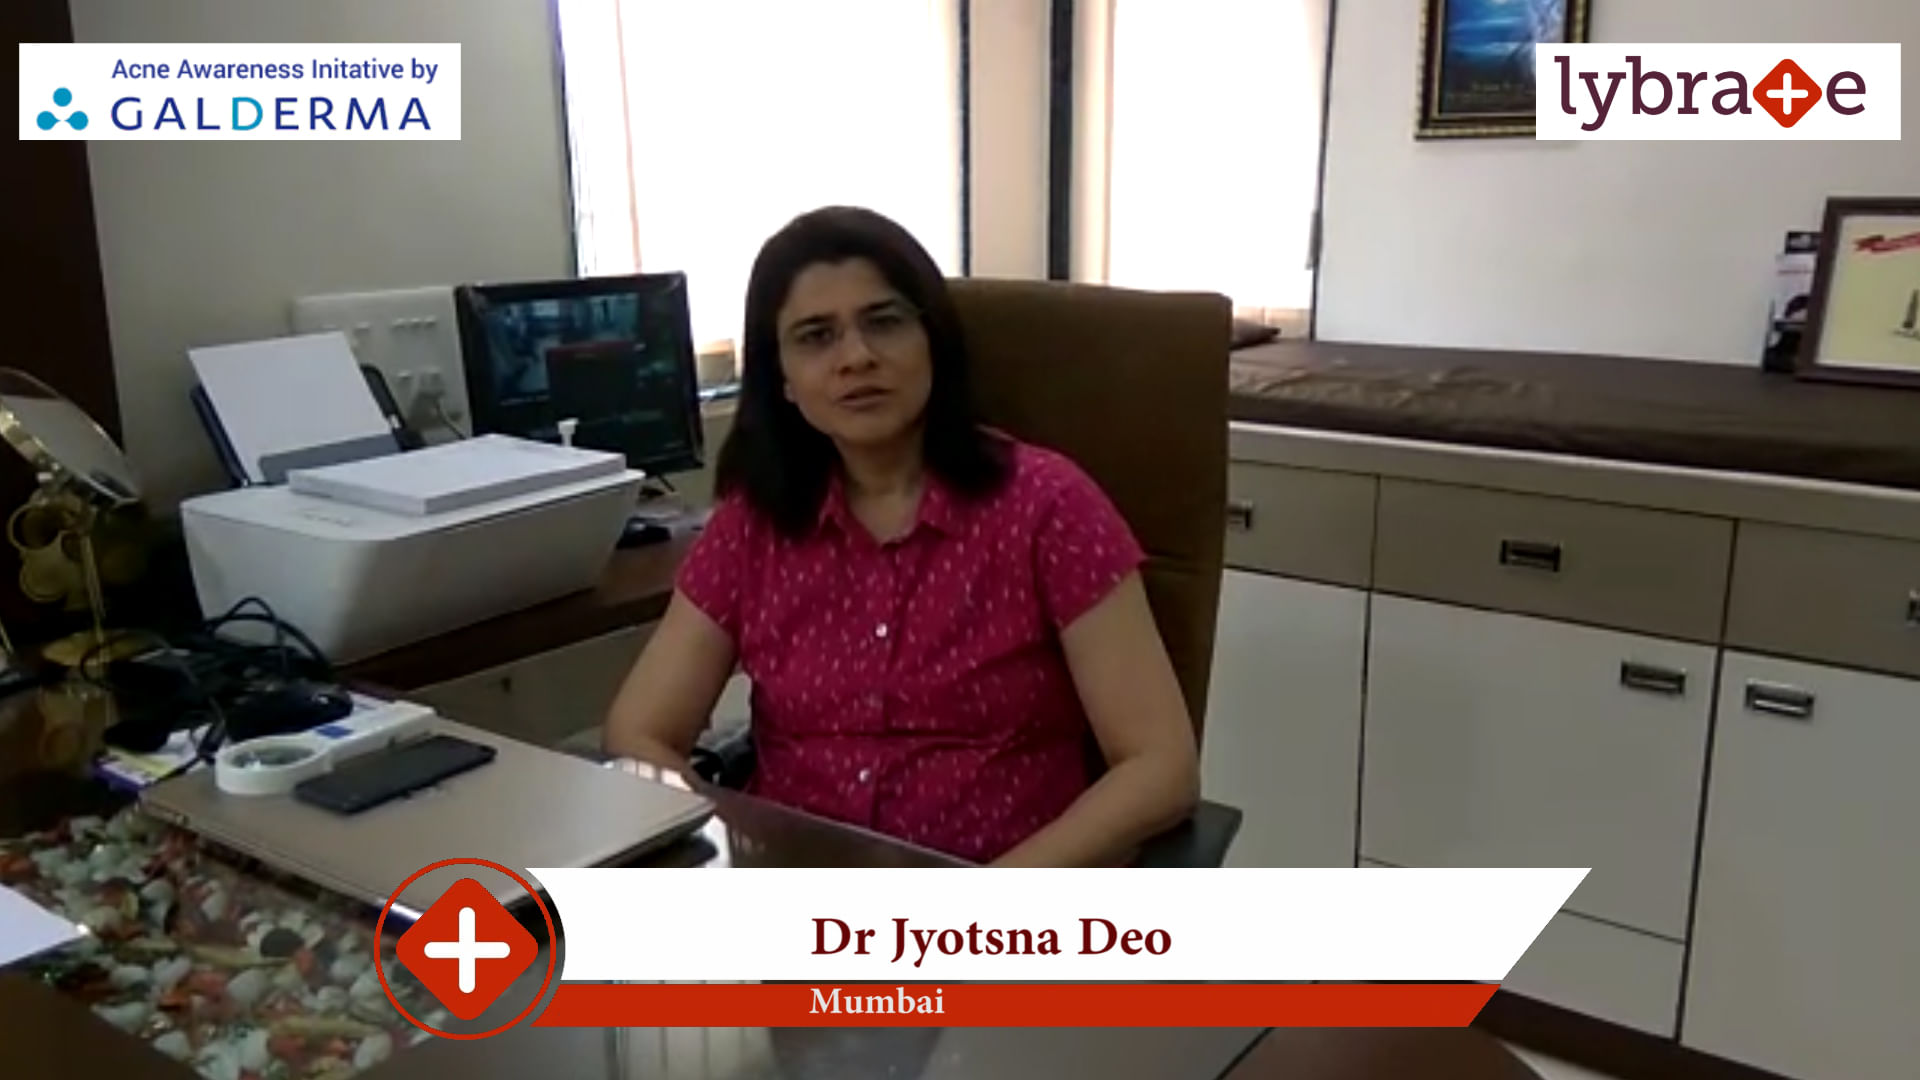 Lybrate | Dr. Jyotsna Deo speaks on IMPORTANCE OF TREATING ACNE EARLY